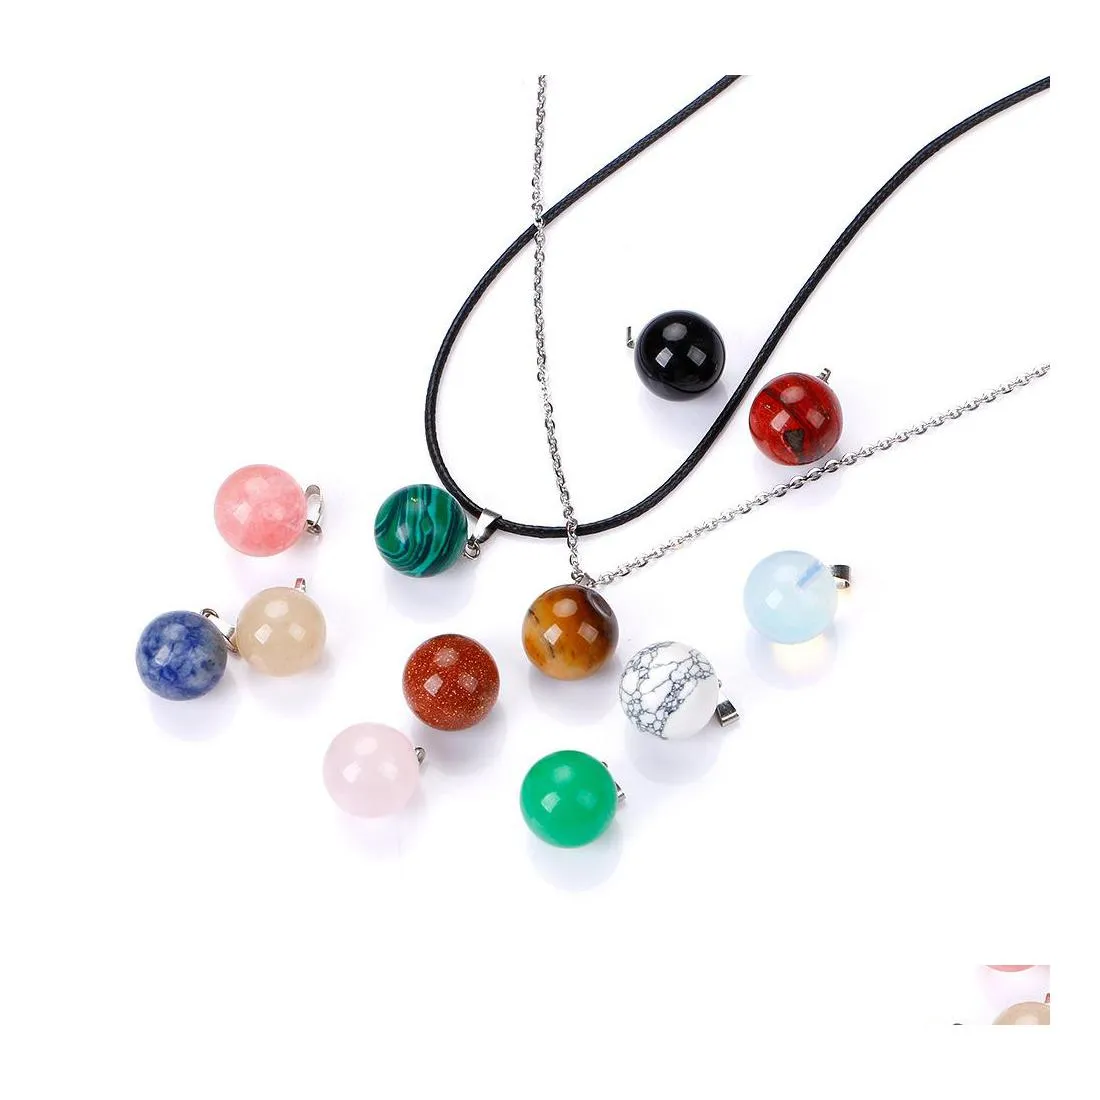 Pendant Necklaces Round Ball Natural Crystal Rose Quartz Stone Necklace Chakra Healing Jewelry For Women Me Baby Drop Delivery Pendan Dhasl